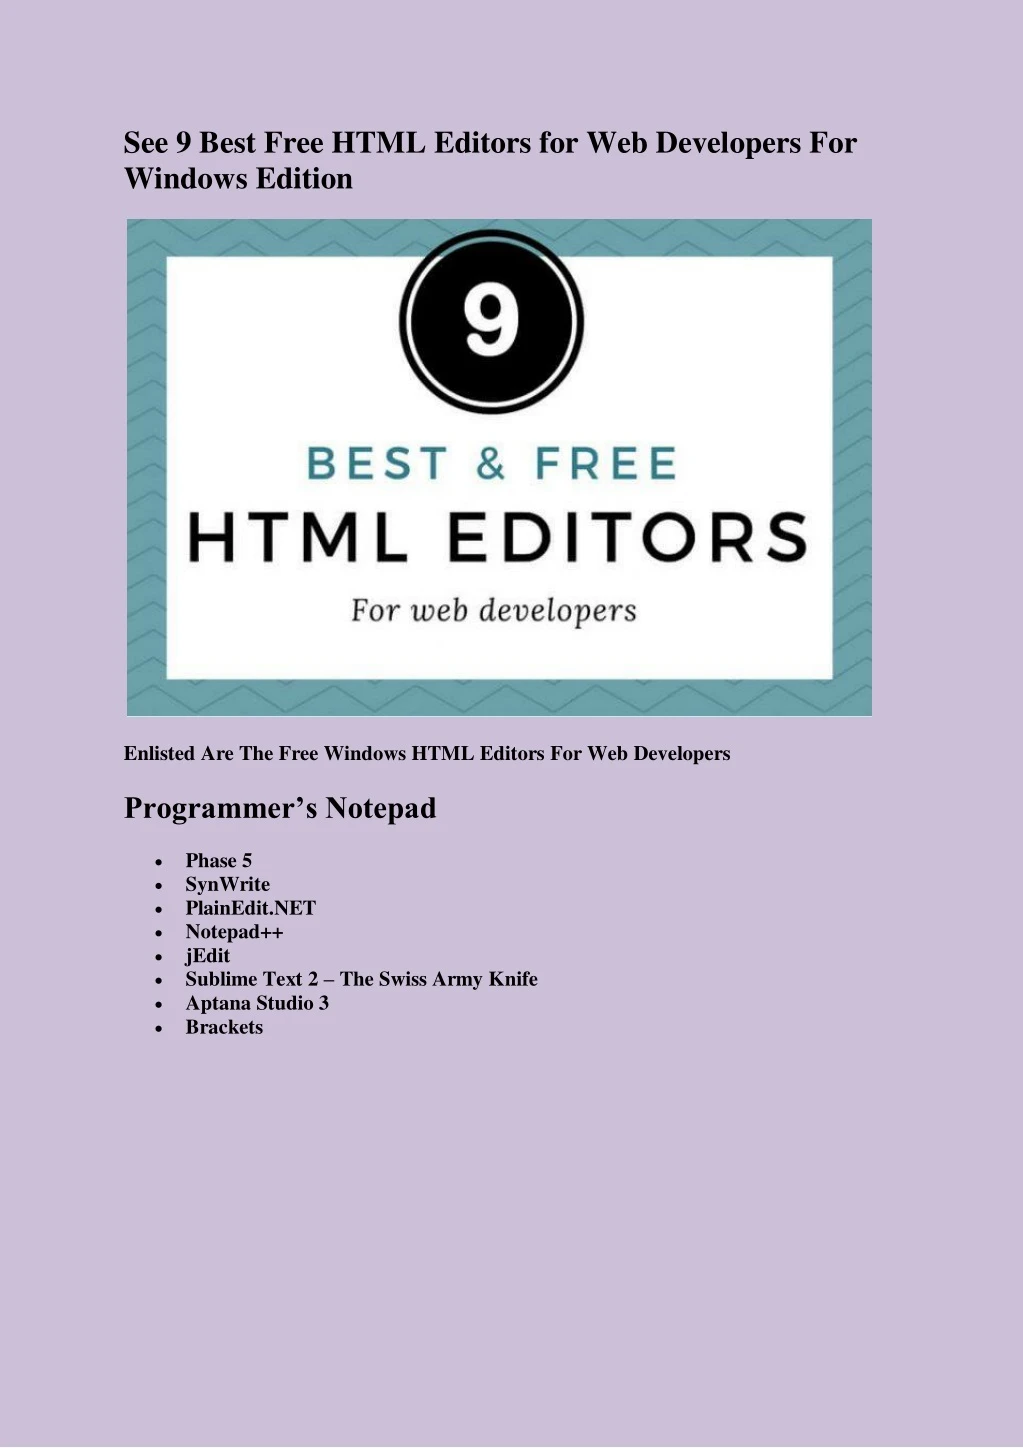 see 9 best free html editors for web developers